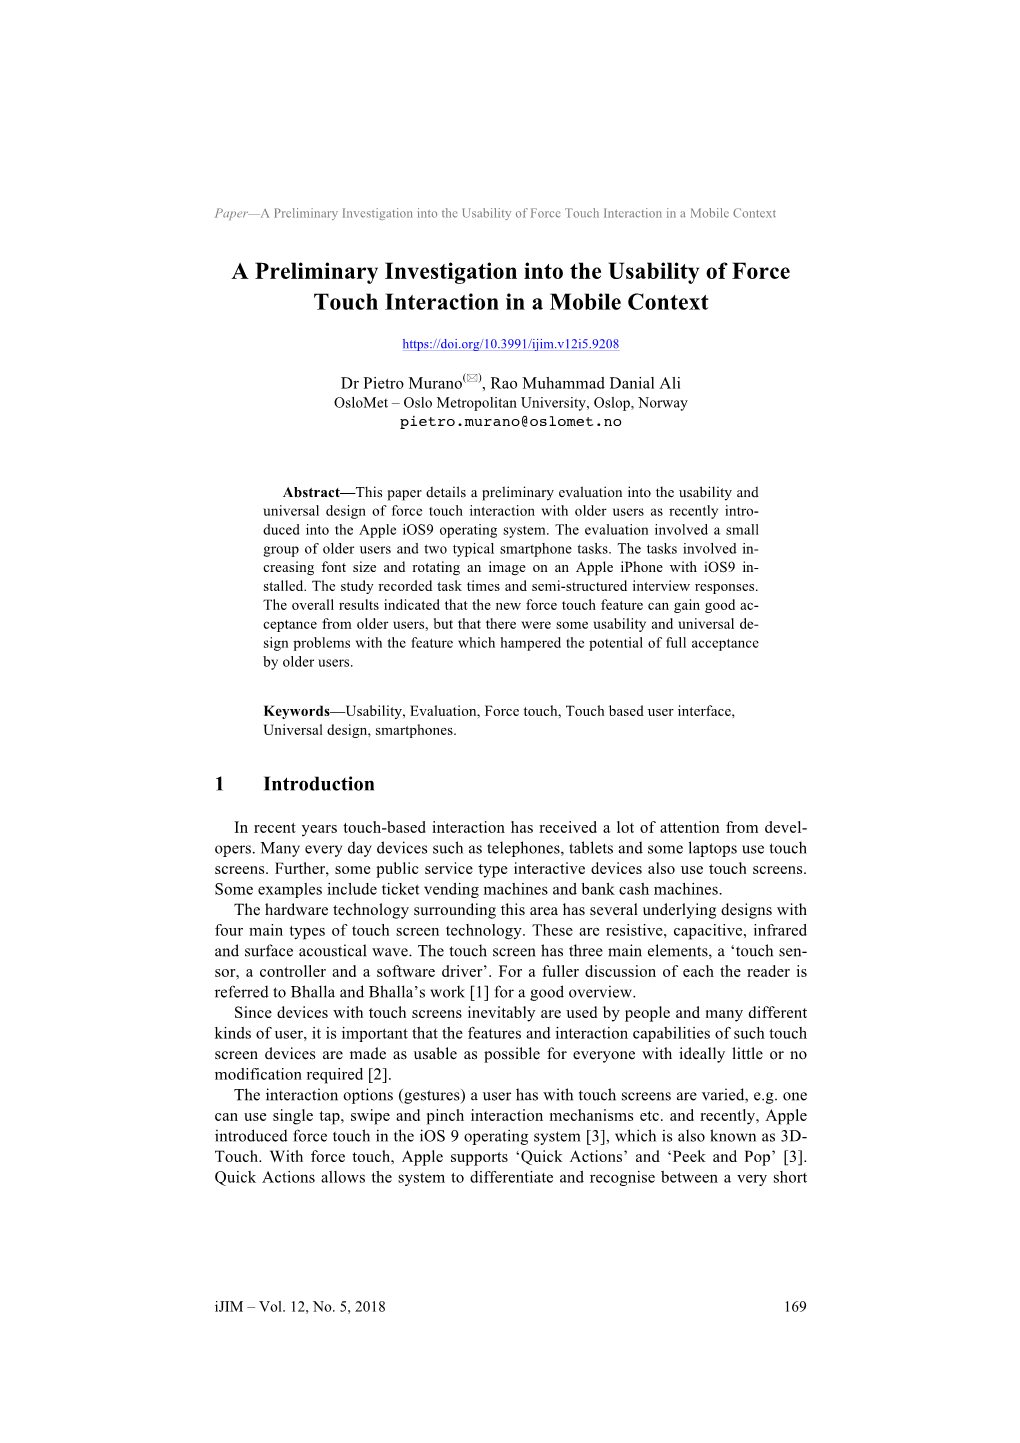 A Preliminary Investigation Into the Usability of Force Touch Interaction in a Mobile Context